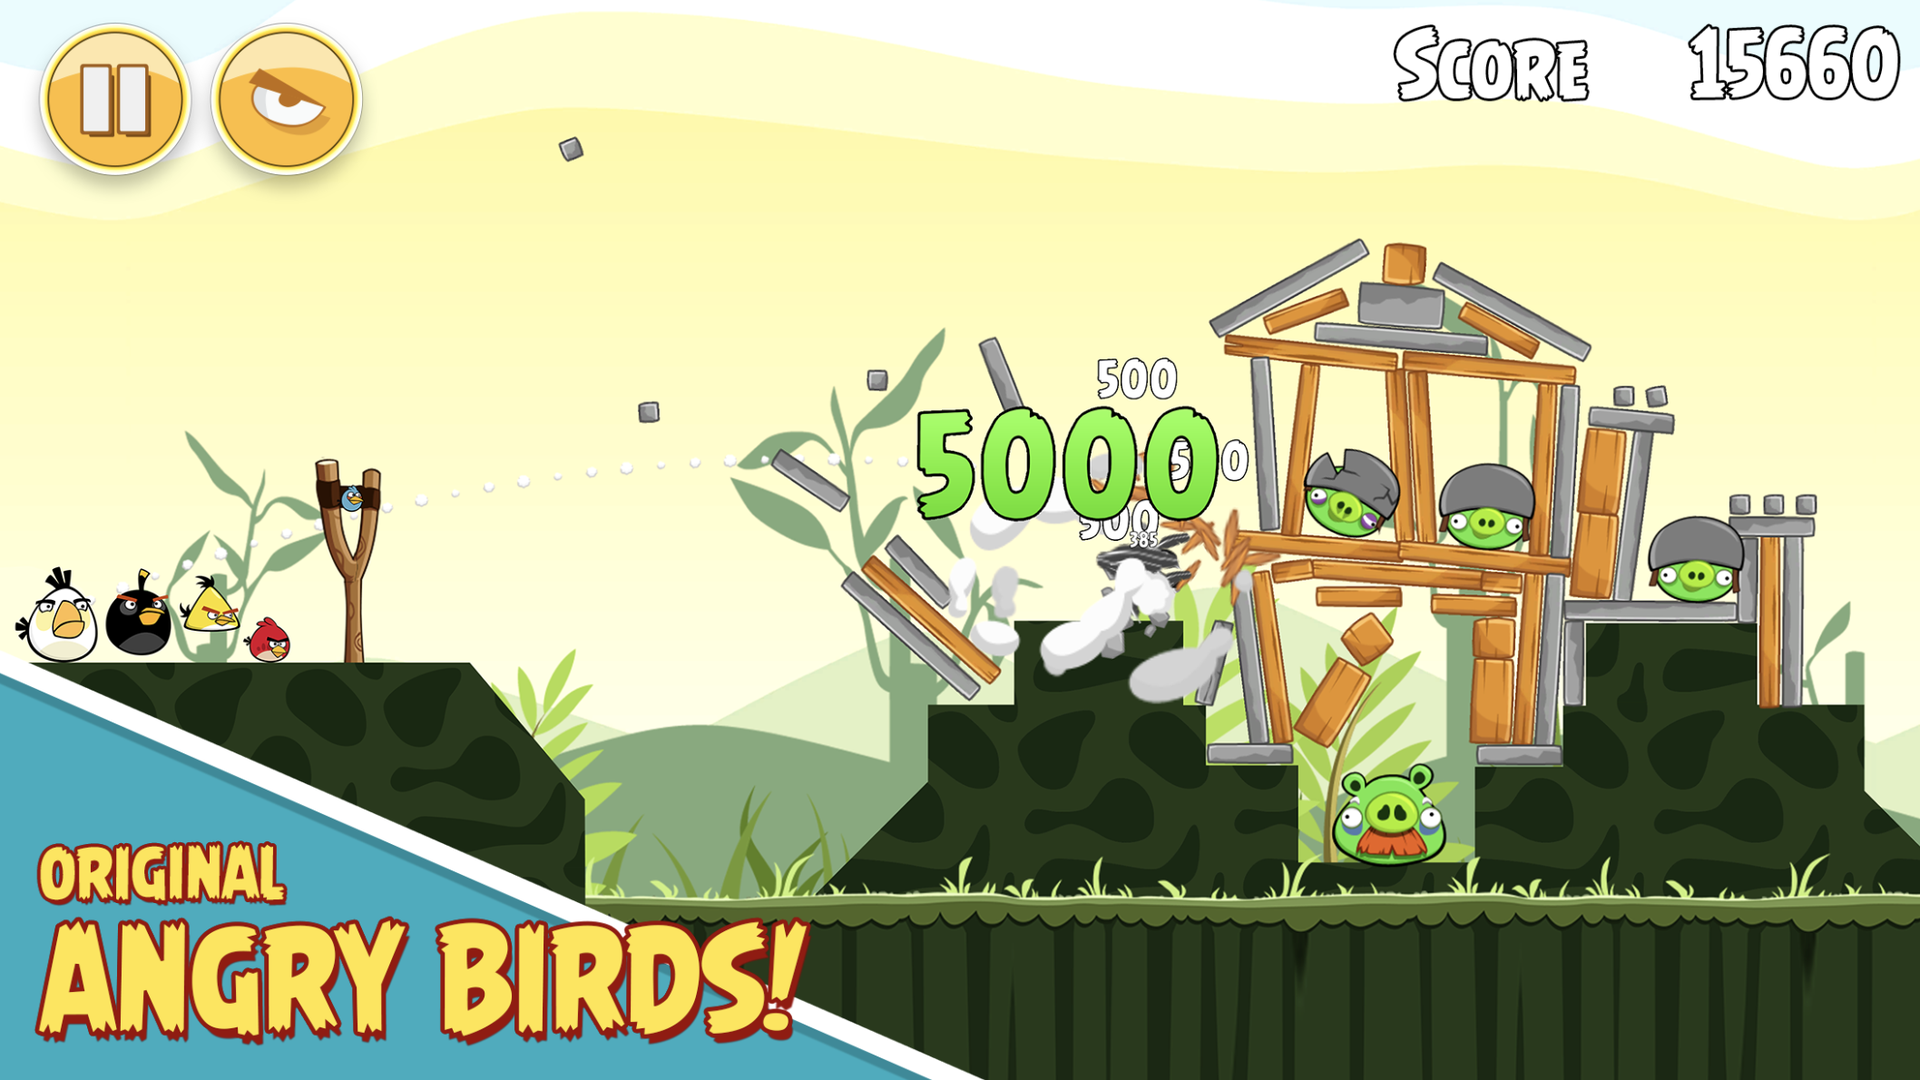 Video game screenshot  showing a collapsing house and birds nearby. Text on the image states: "Original Angry Birds!"